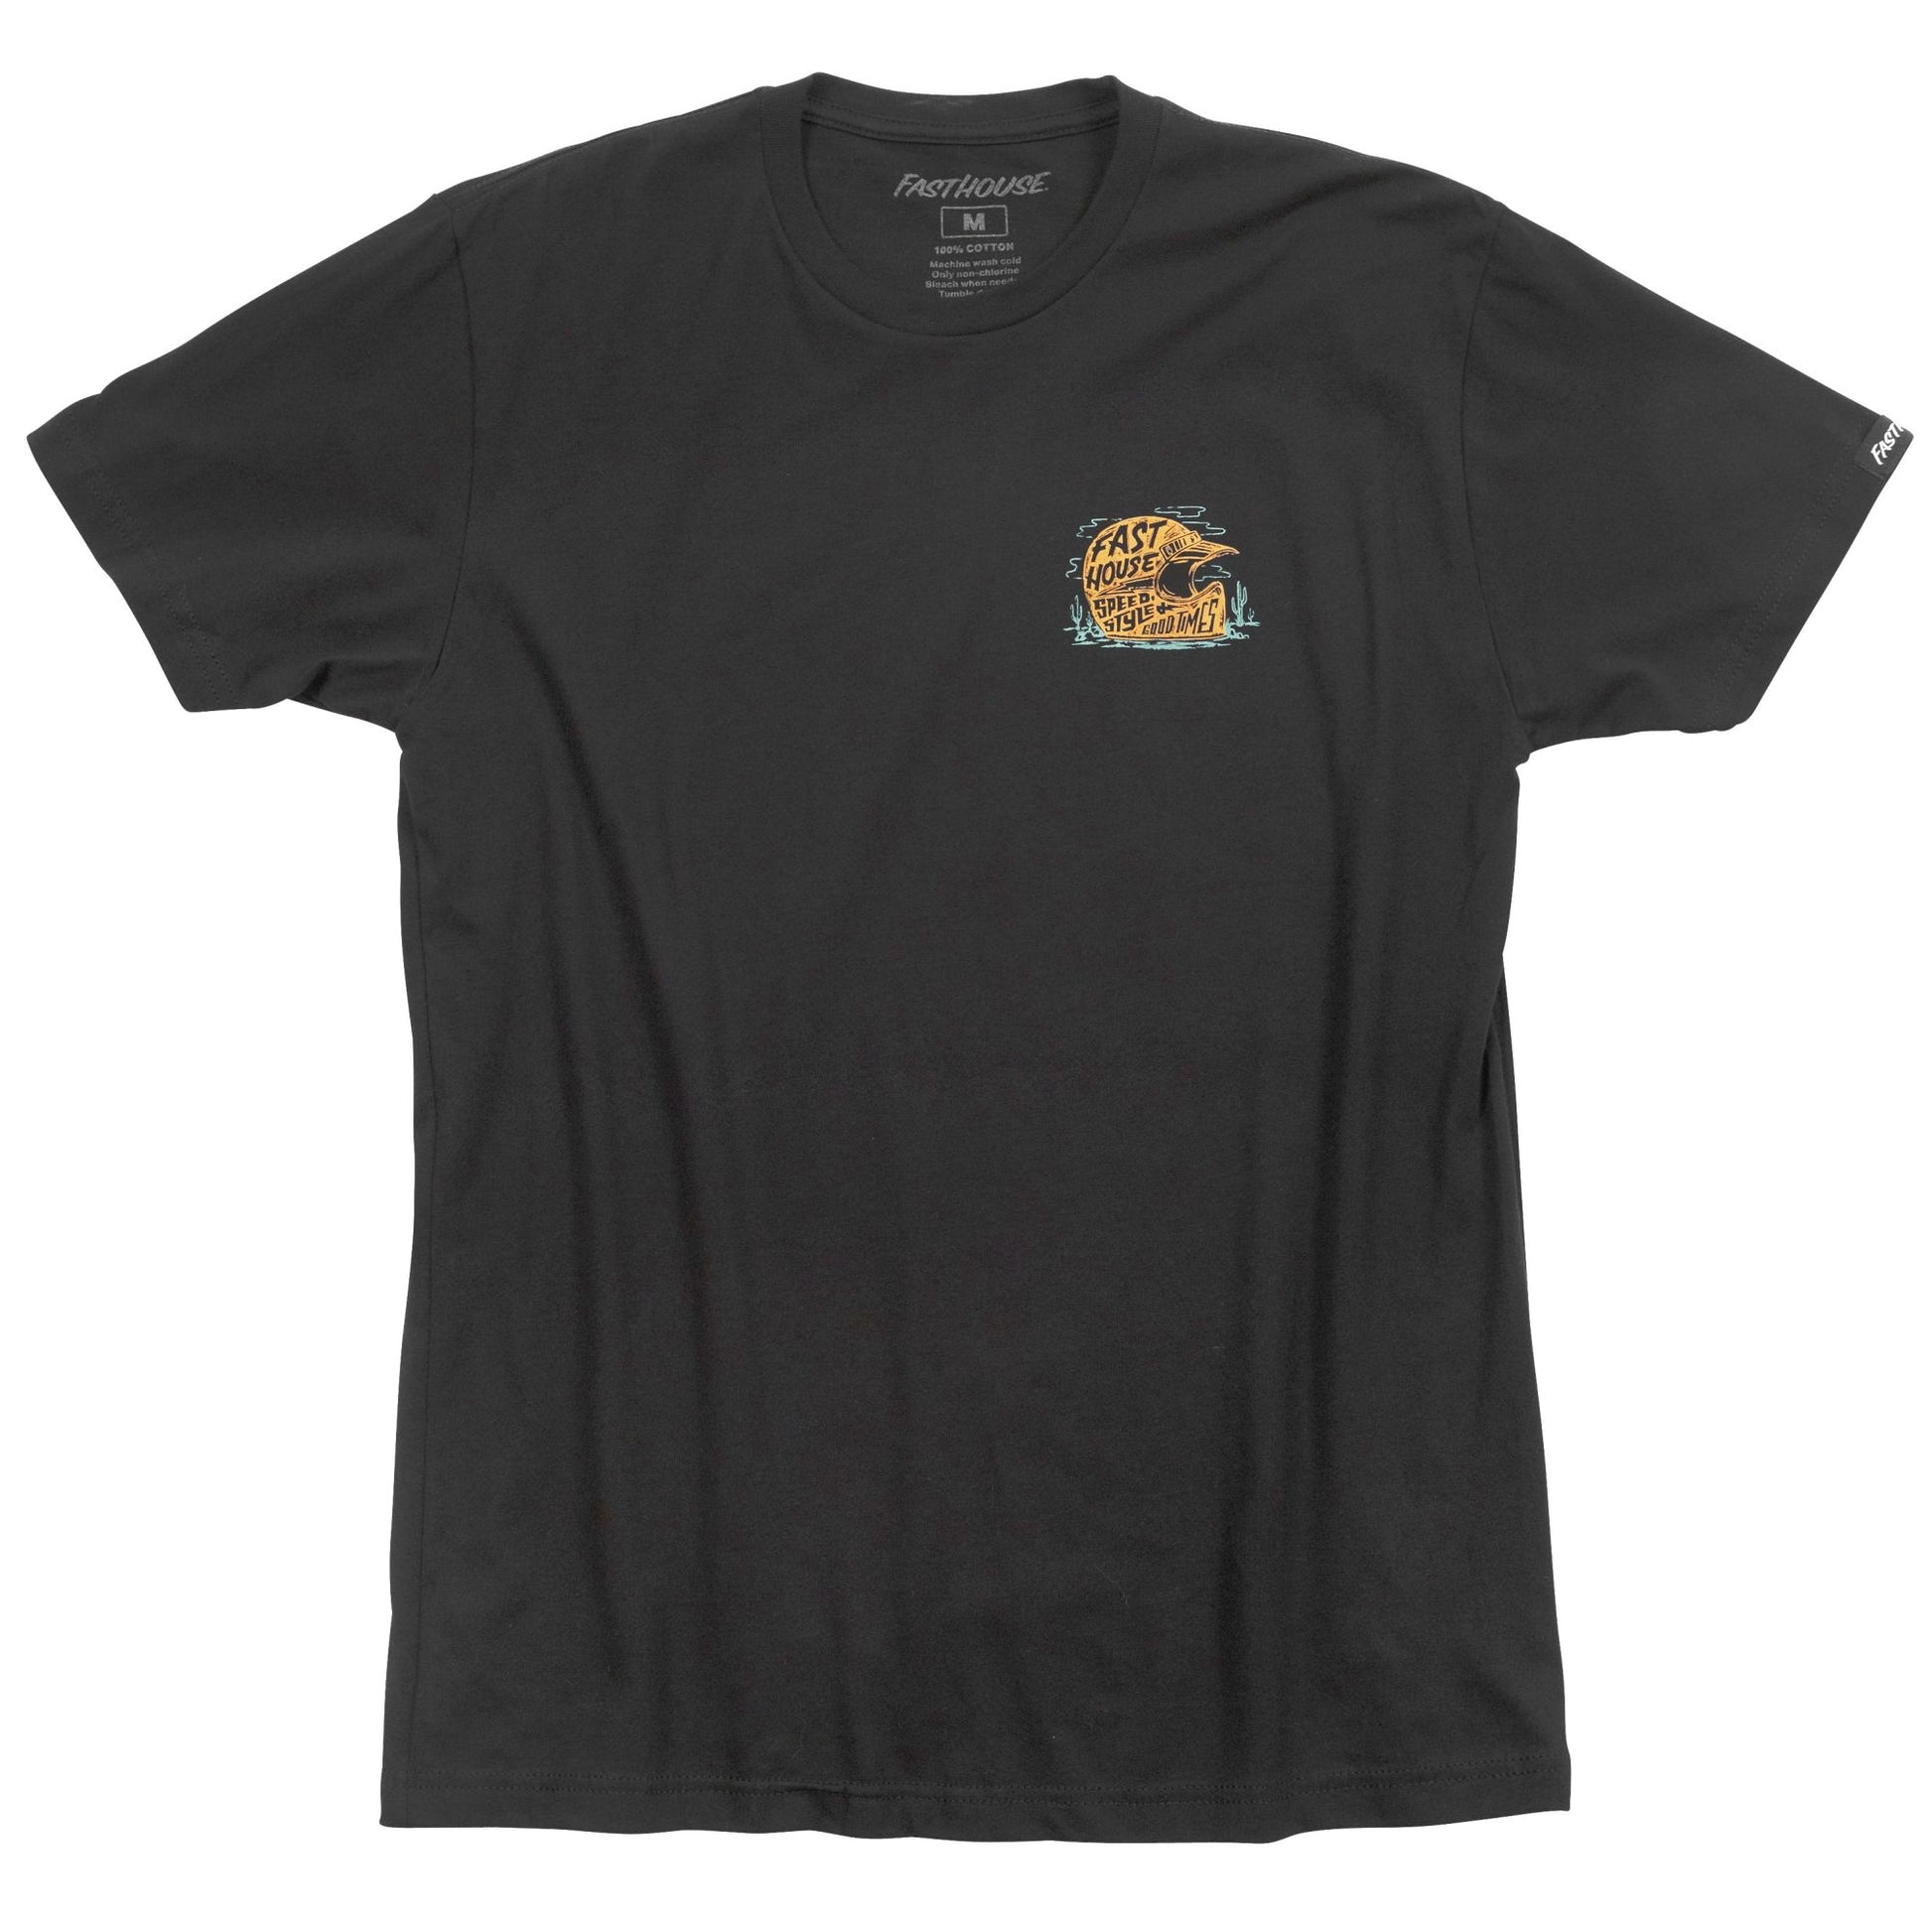 Fasthouse Dust Devil Tee Black SS Shirts